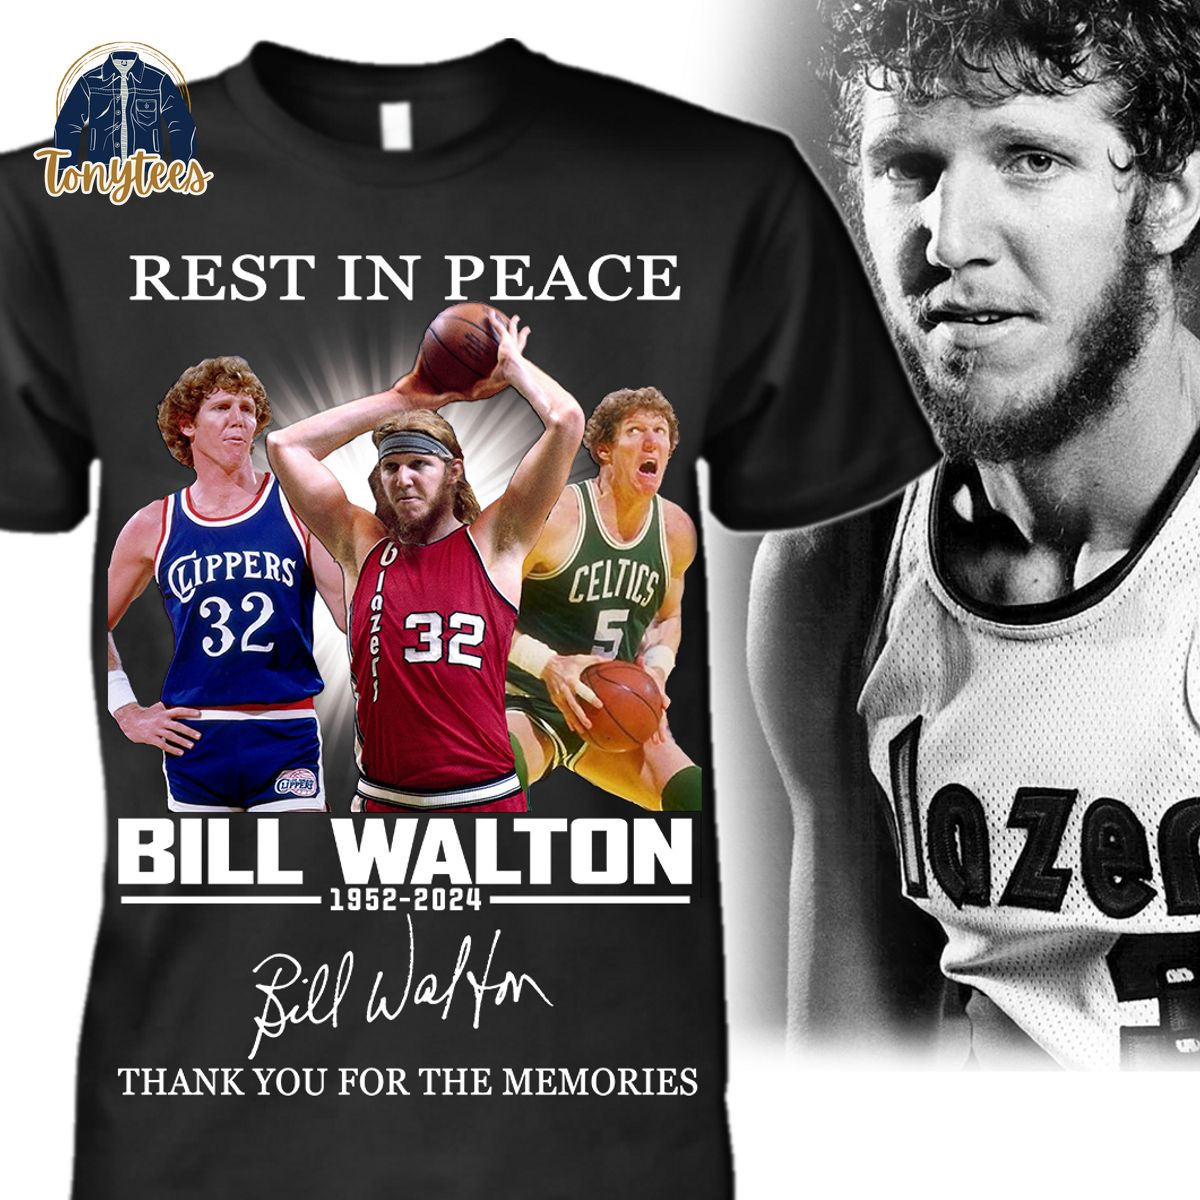 Bill Walton Rest in peace thank you for the memories shirt